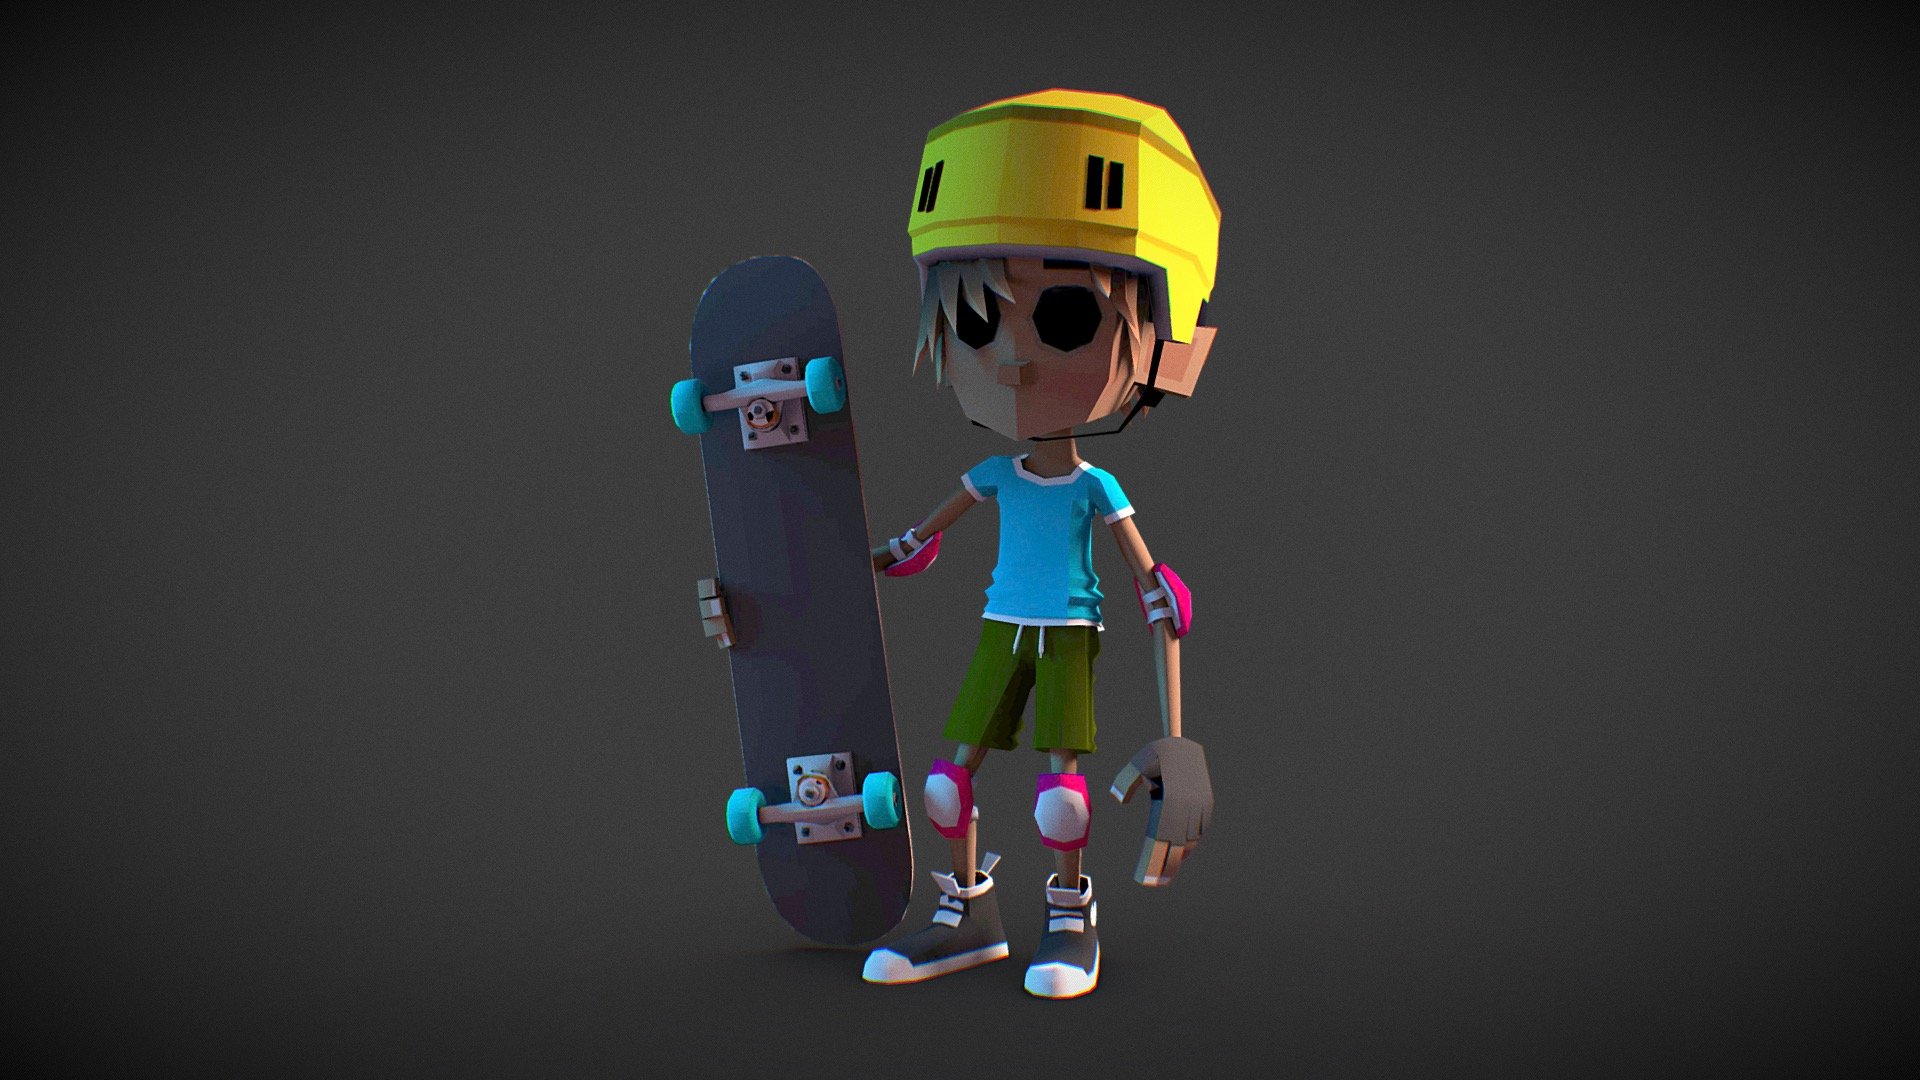 This is one of the characters in development for Pocket Skate

Thanks, for checking it out!
- Pete - Skate Kid - Pocket Skate - 3D model by Pocket Skate! (@PocketSkate) 3d model